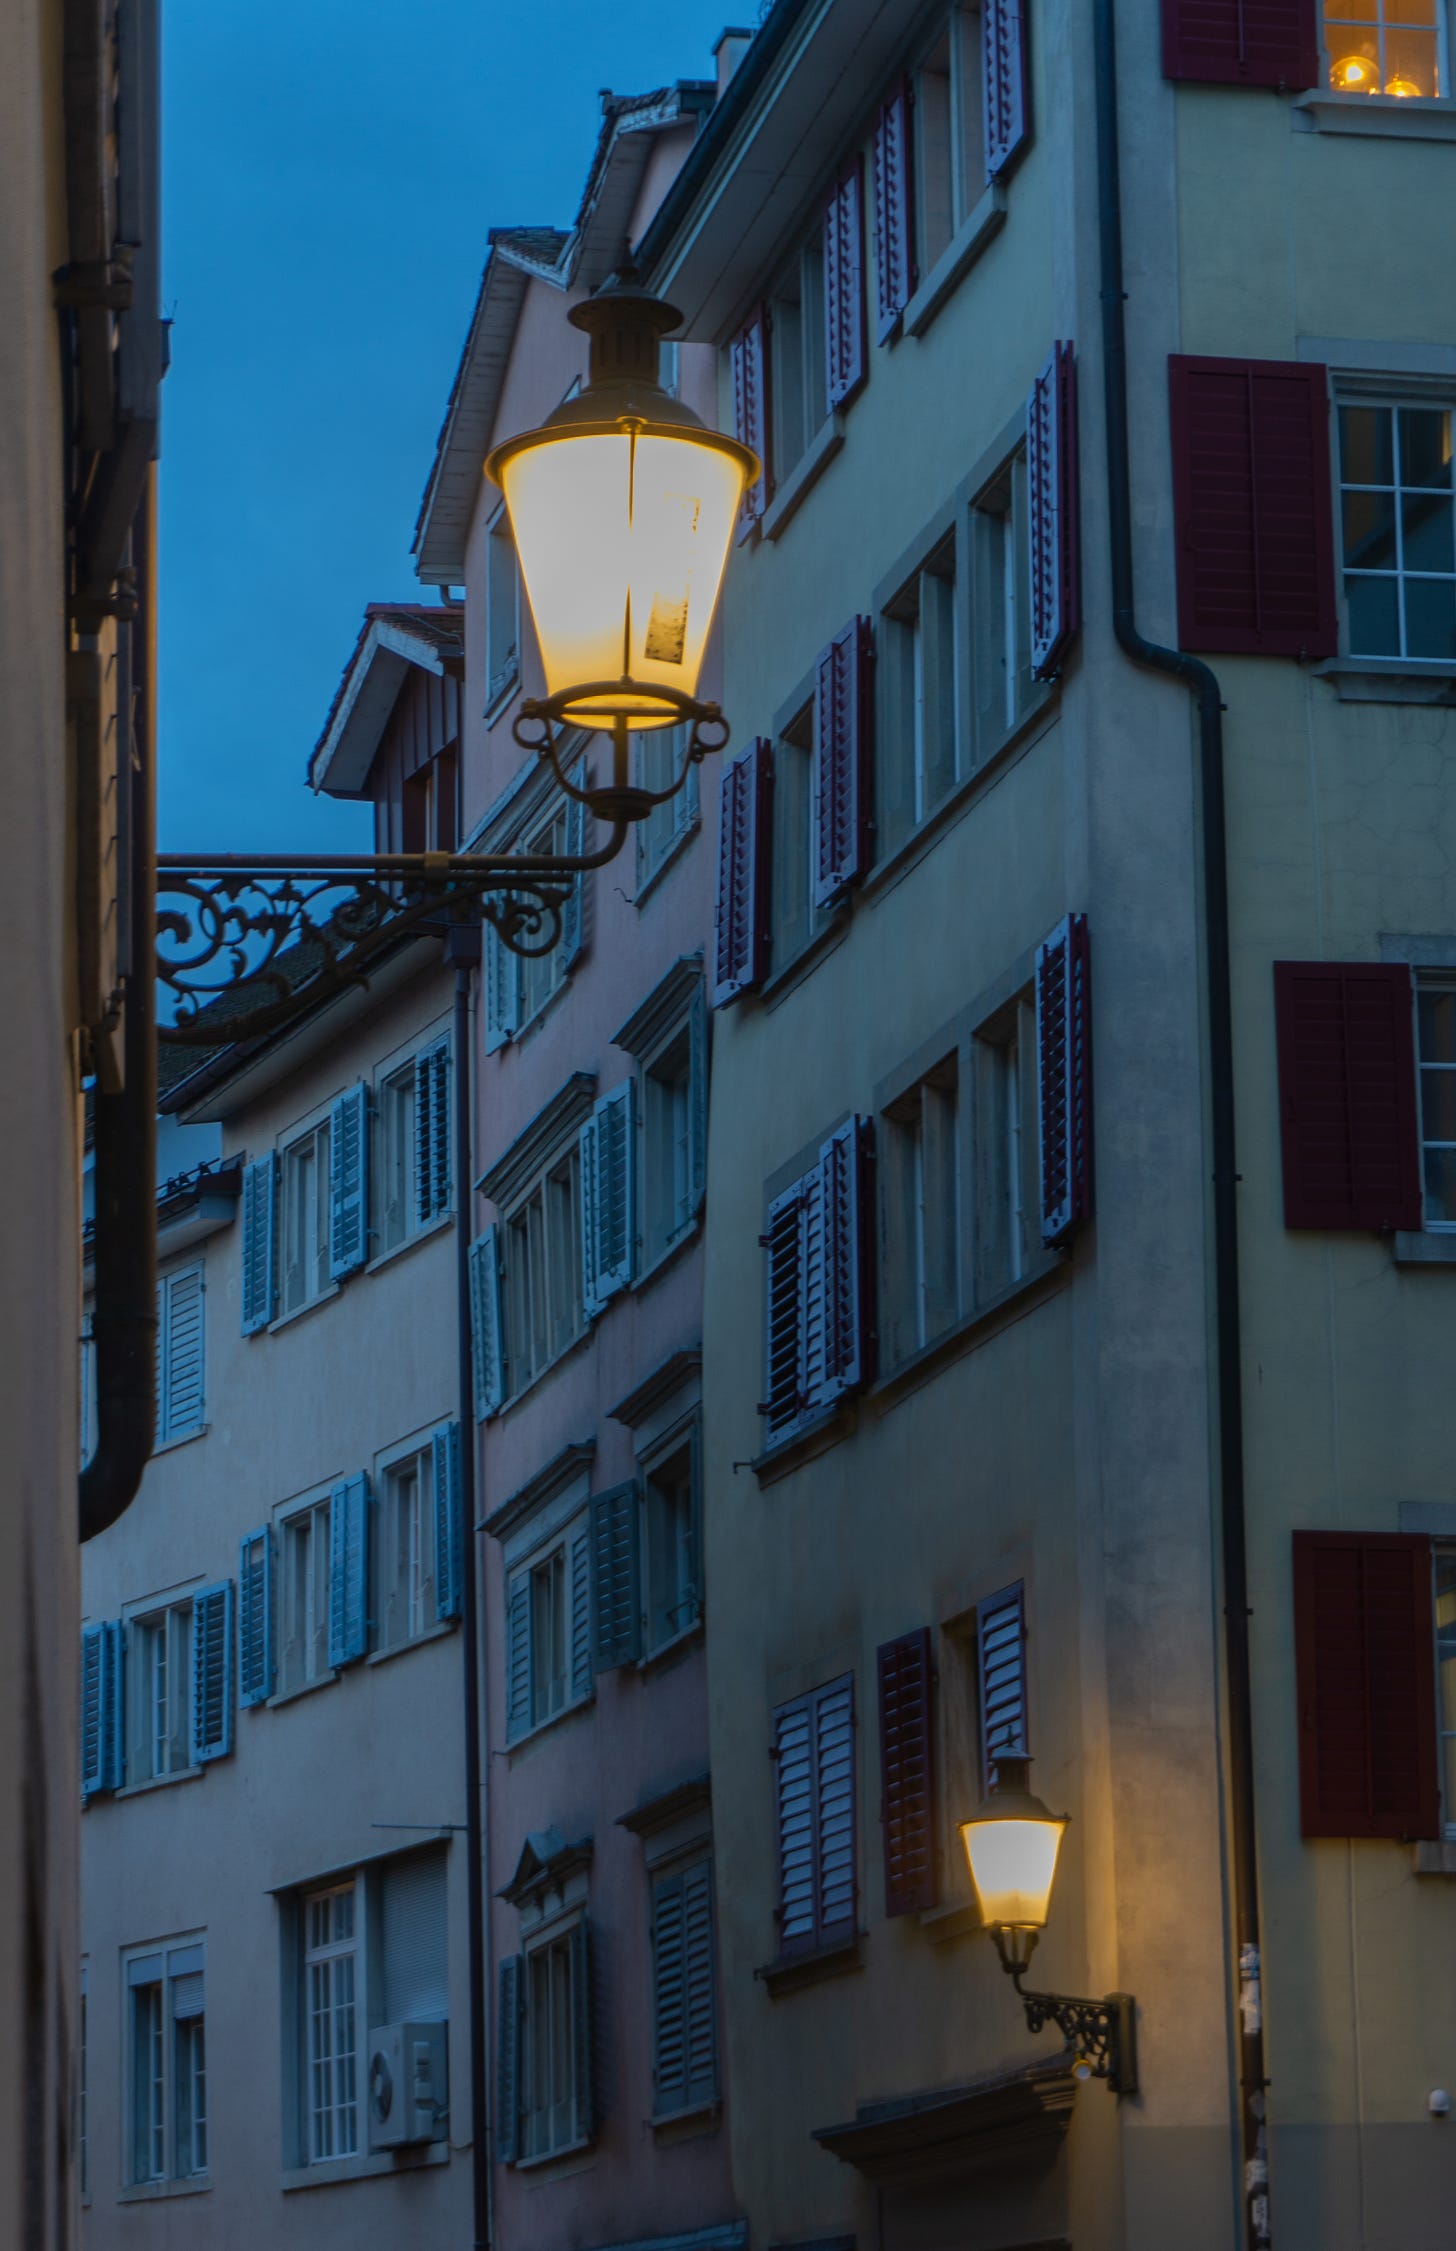 Row of buildings with a street lamp in the foregorund